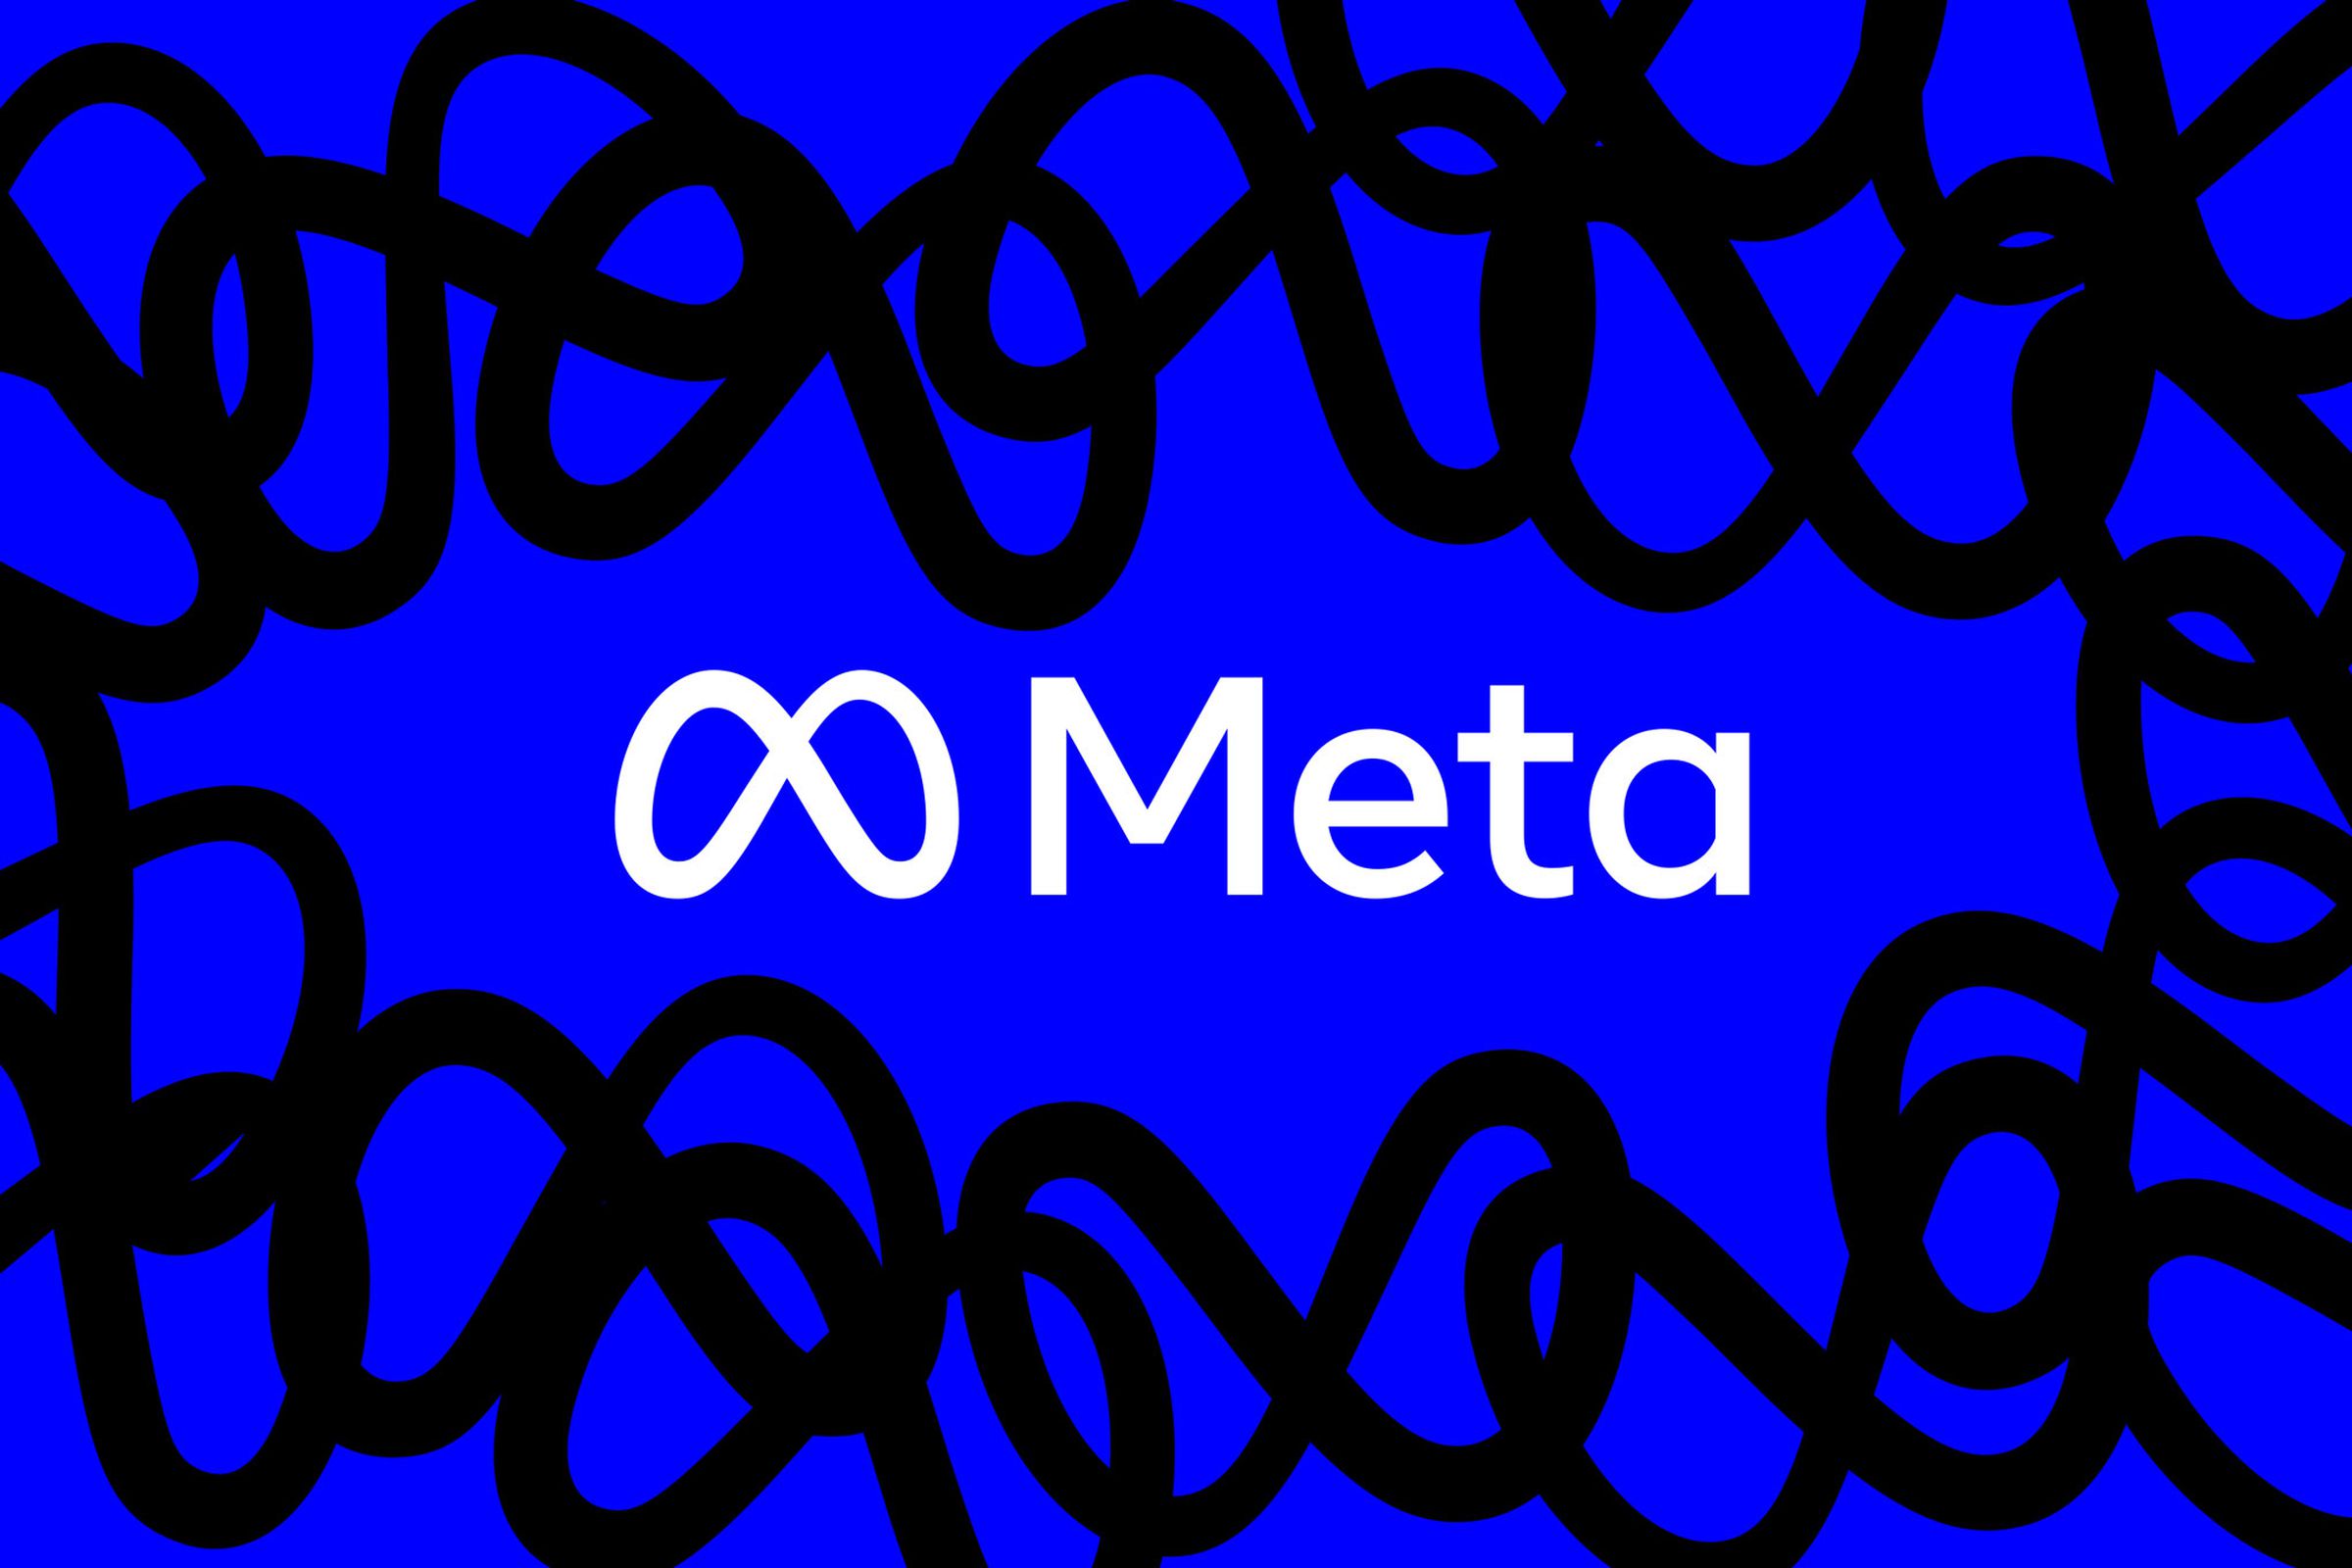 Image of the Meta logo and work mark on a blue background, bordered by black scribbles made out of the Meta logo.